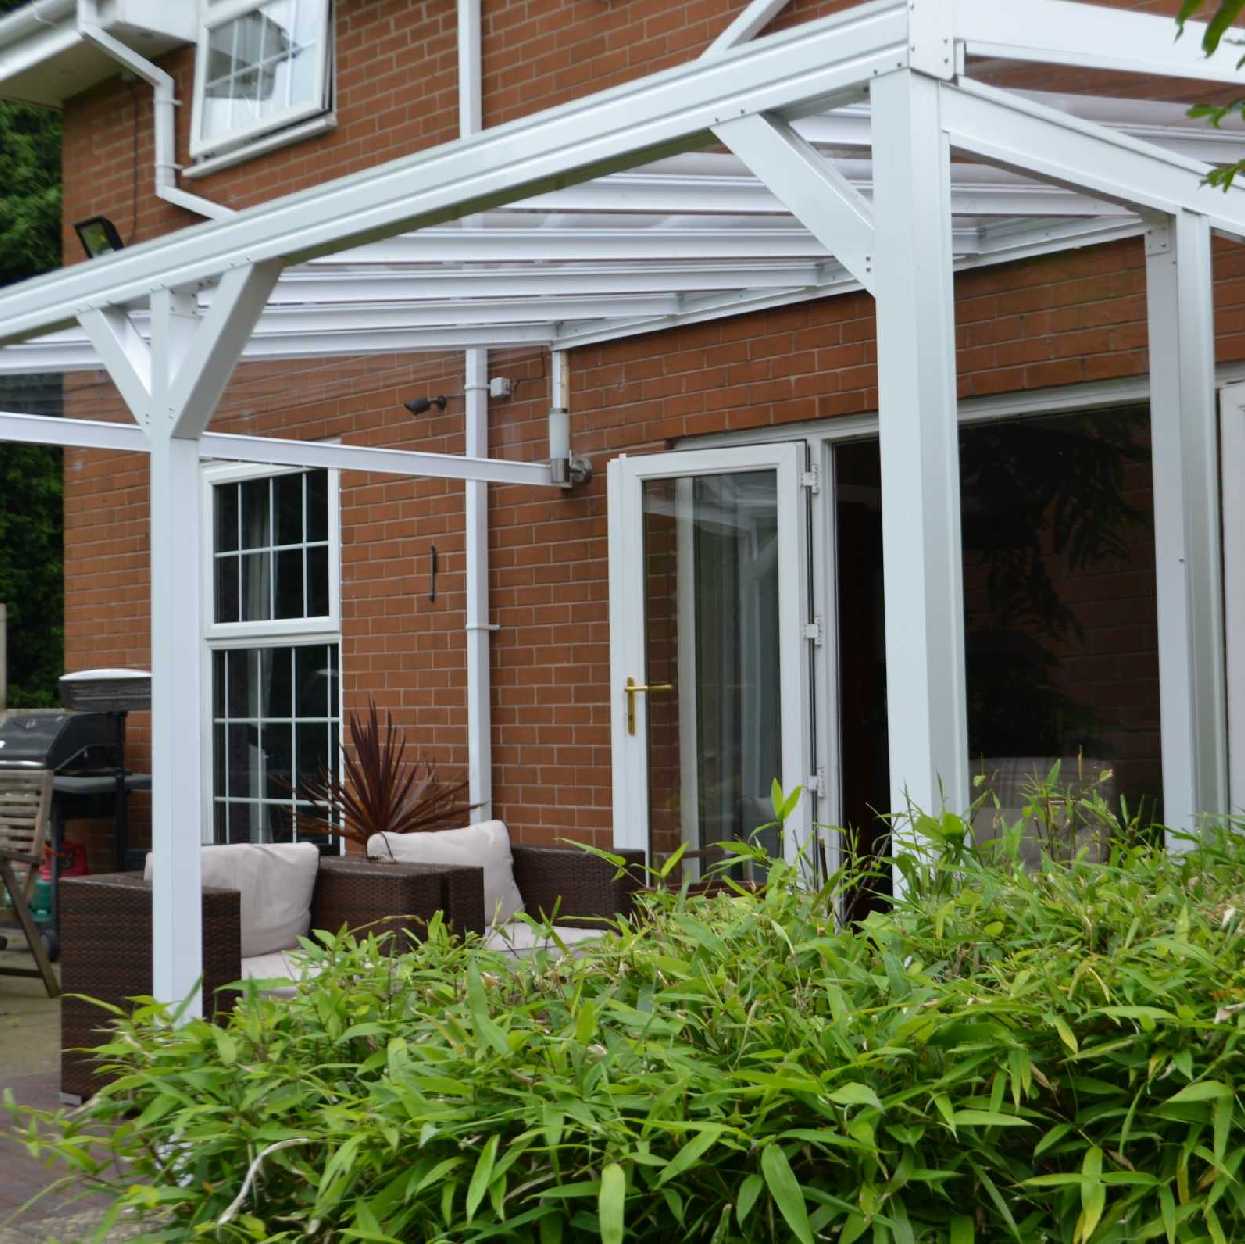 Omega Smart Lean-To Canopy, White with 6mm Glass Clear Plate Polycarbonate Glazing - 7.7m (W) x 1.5m (P), (4) Supporting Posts from Omega Build